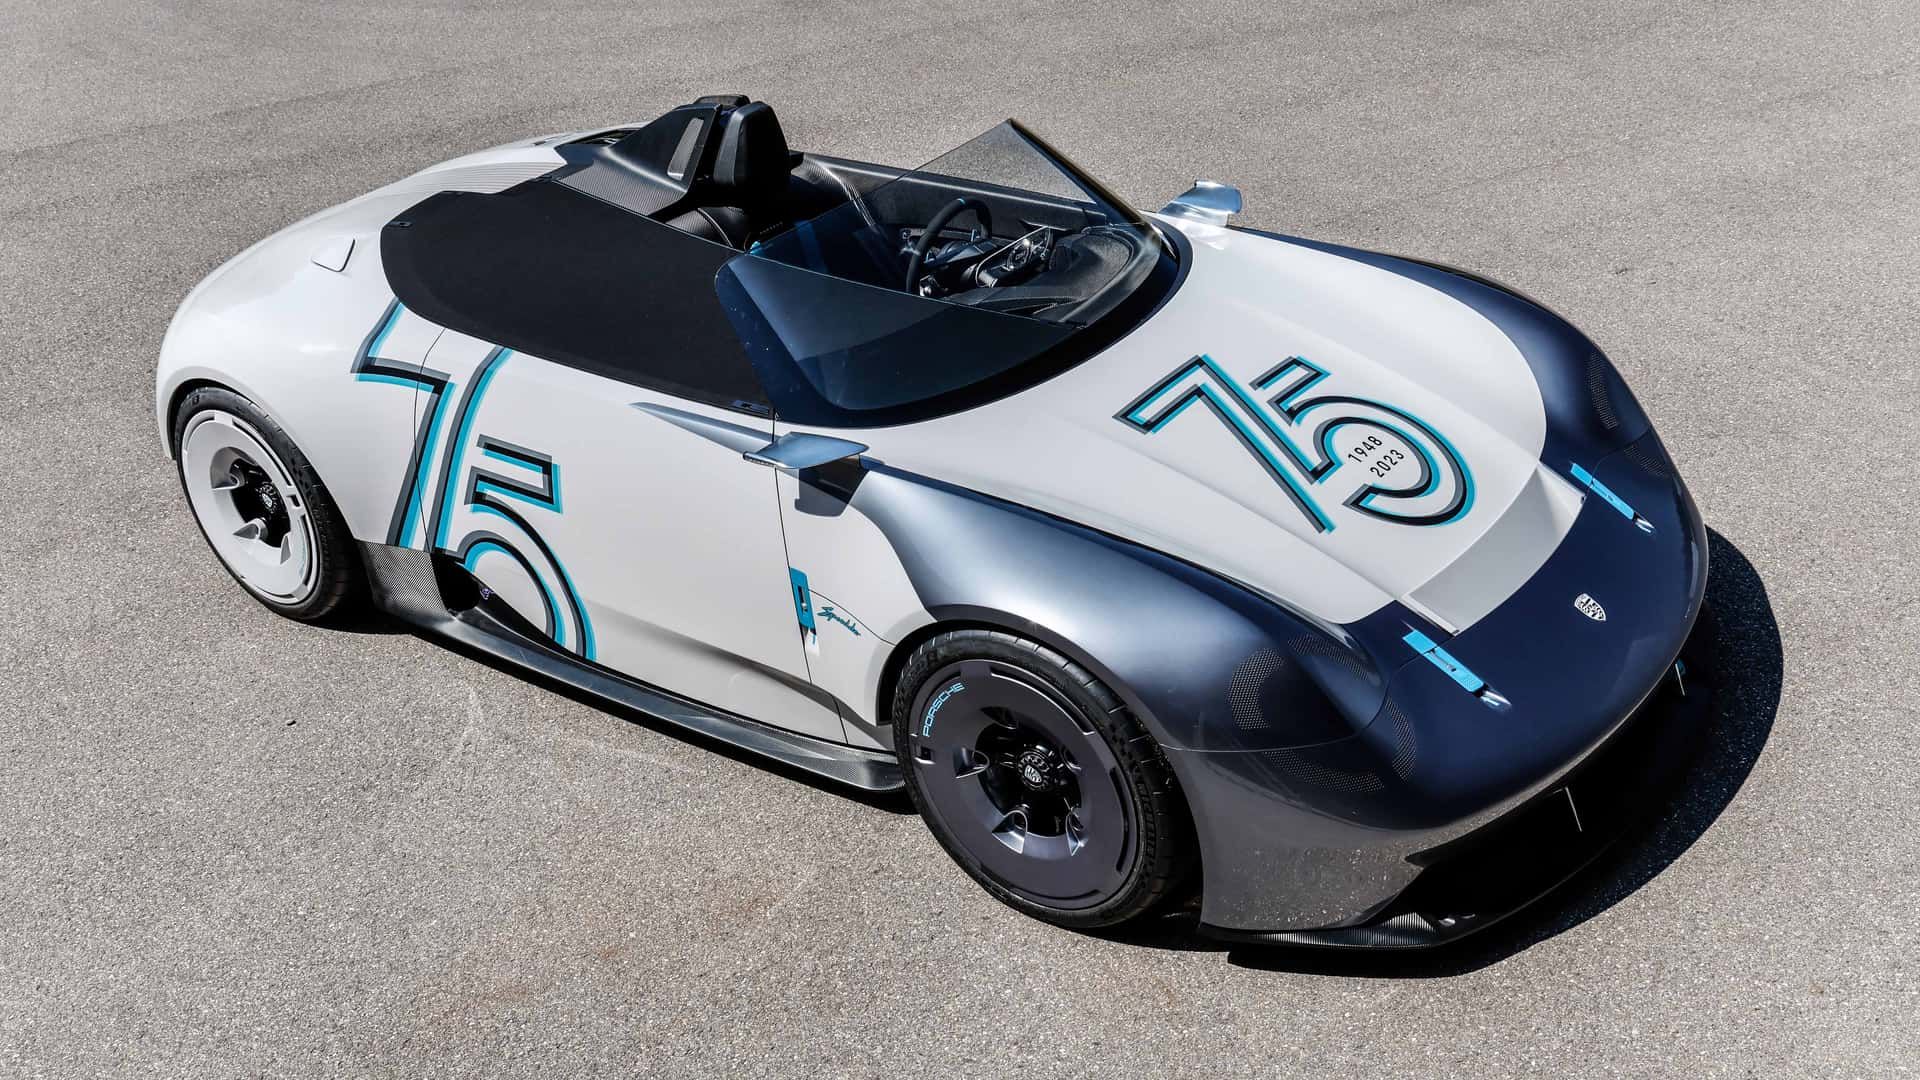 Caterham Project V Debuts: 2,623-Pound EV Sports Car, 268 HP And RWD